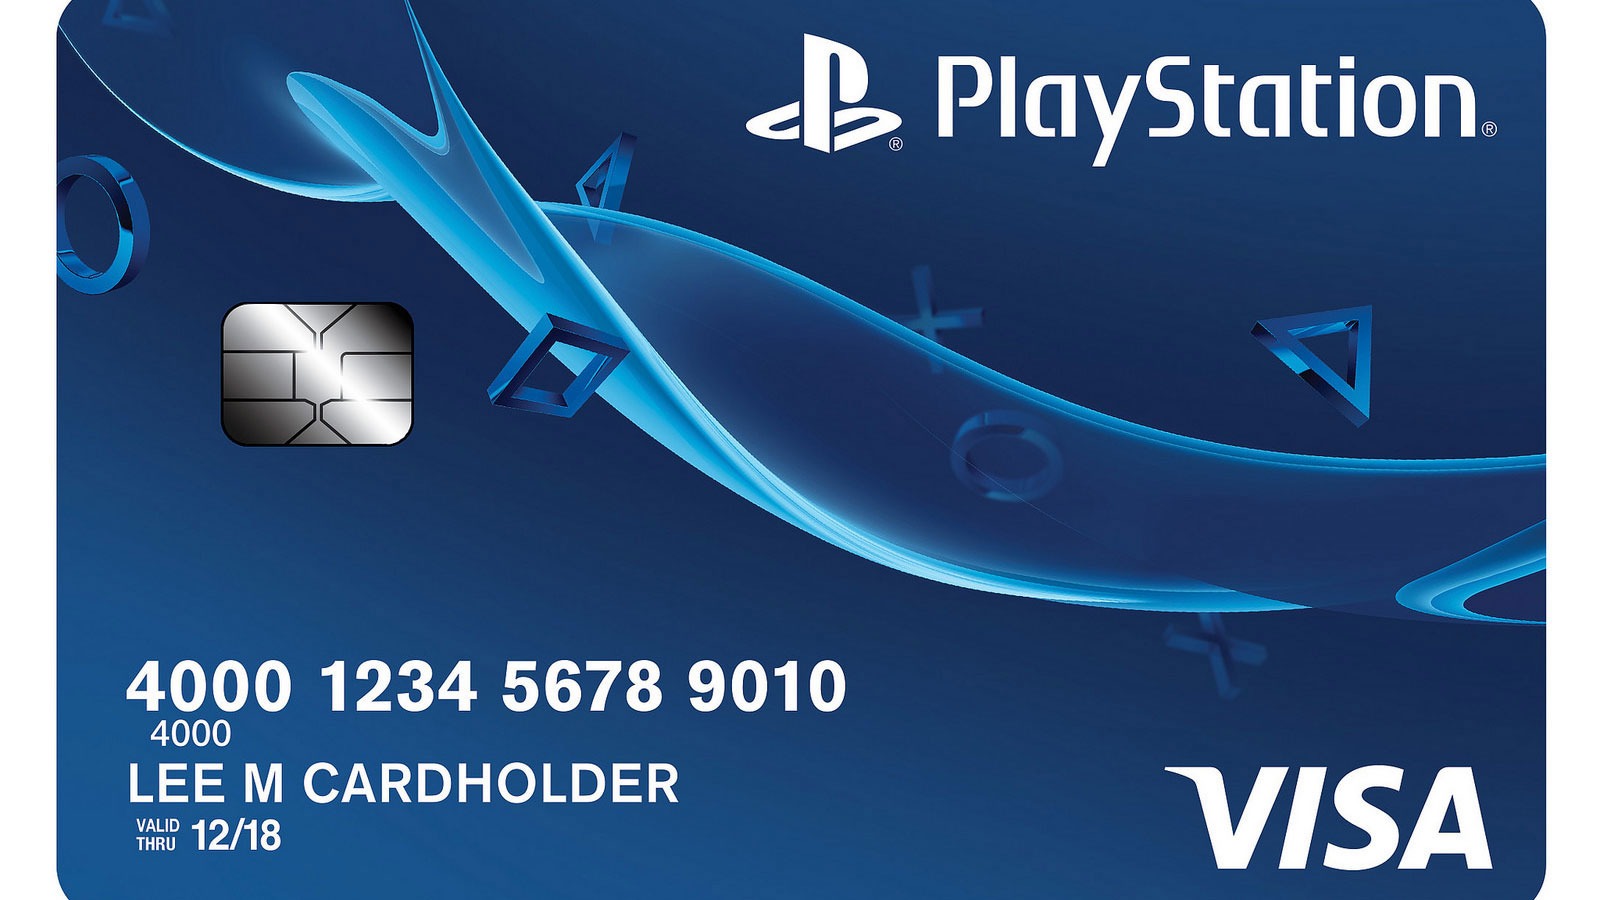 PlayStation credit card gives extra money back for gaming purchases